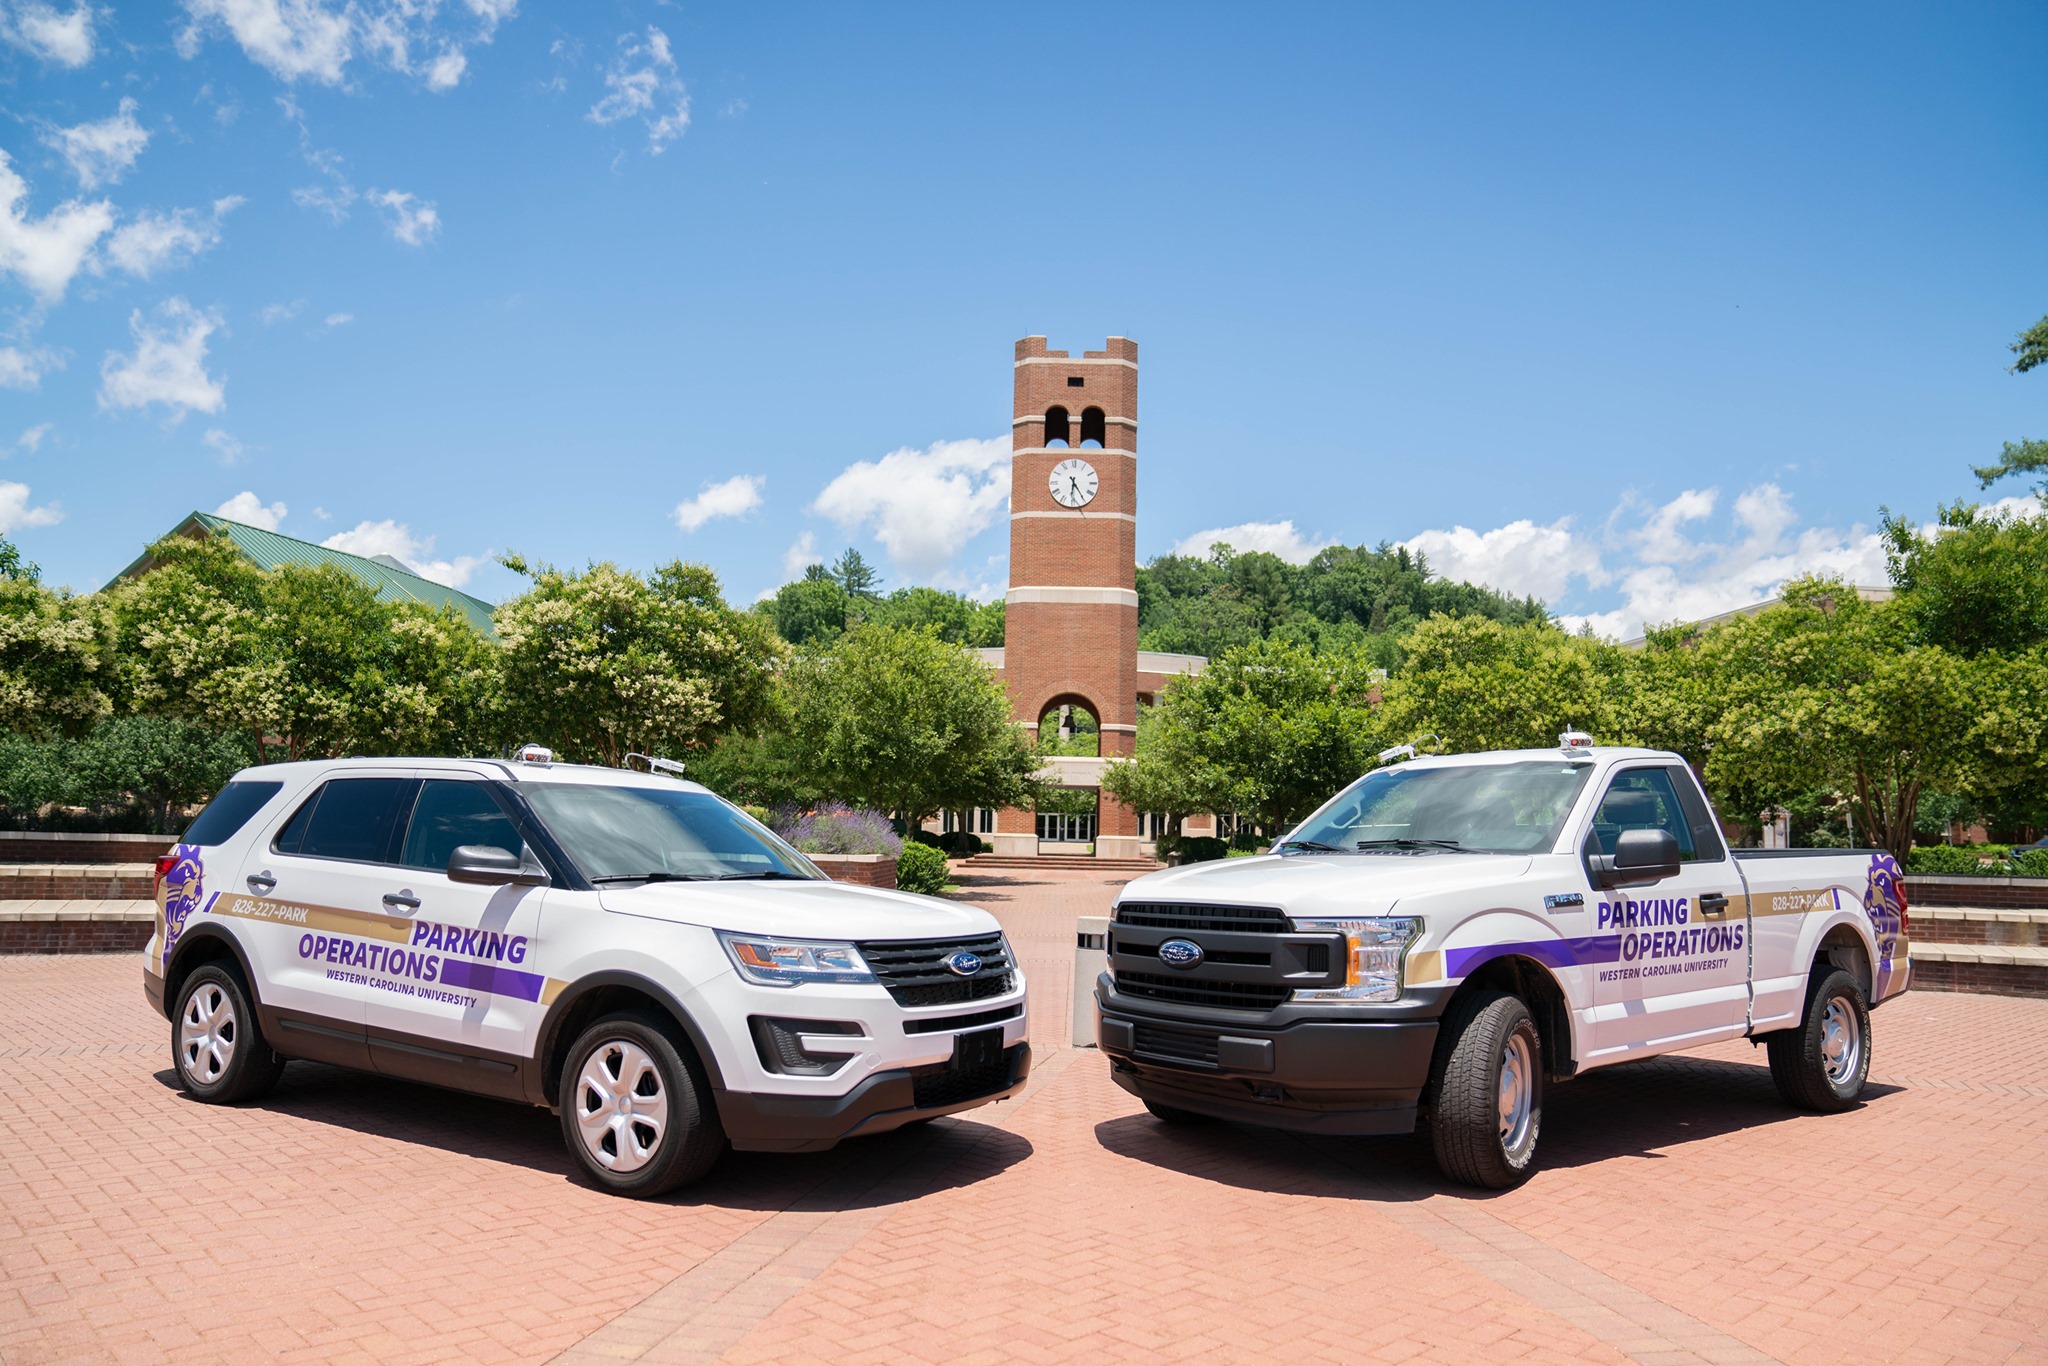 An image of the LPR vehicles used on Western Carolina University's Cullowhee Campus